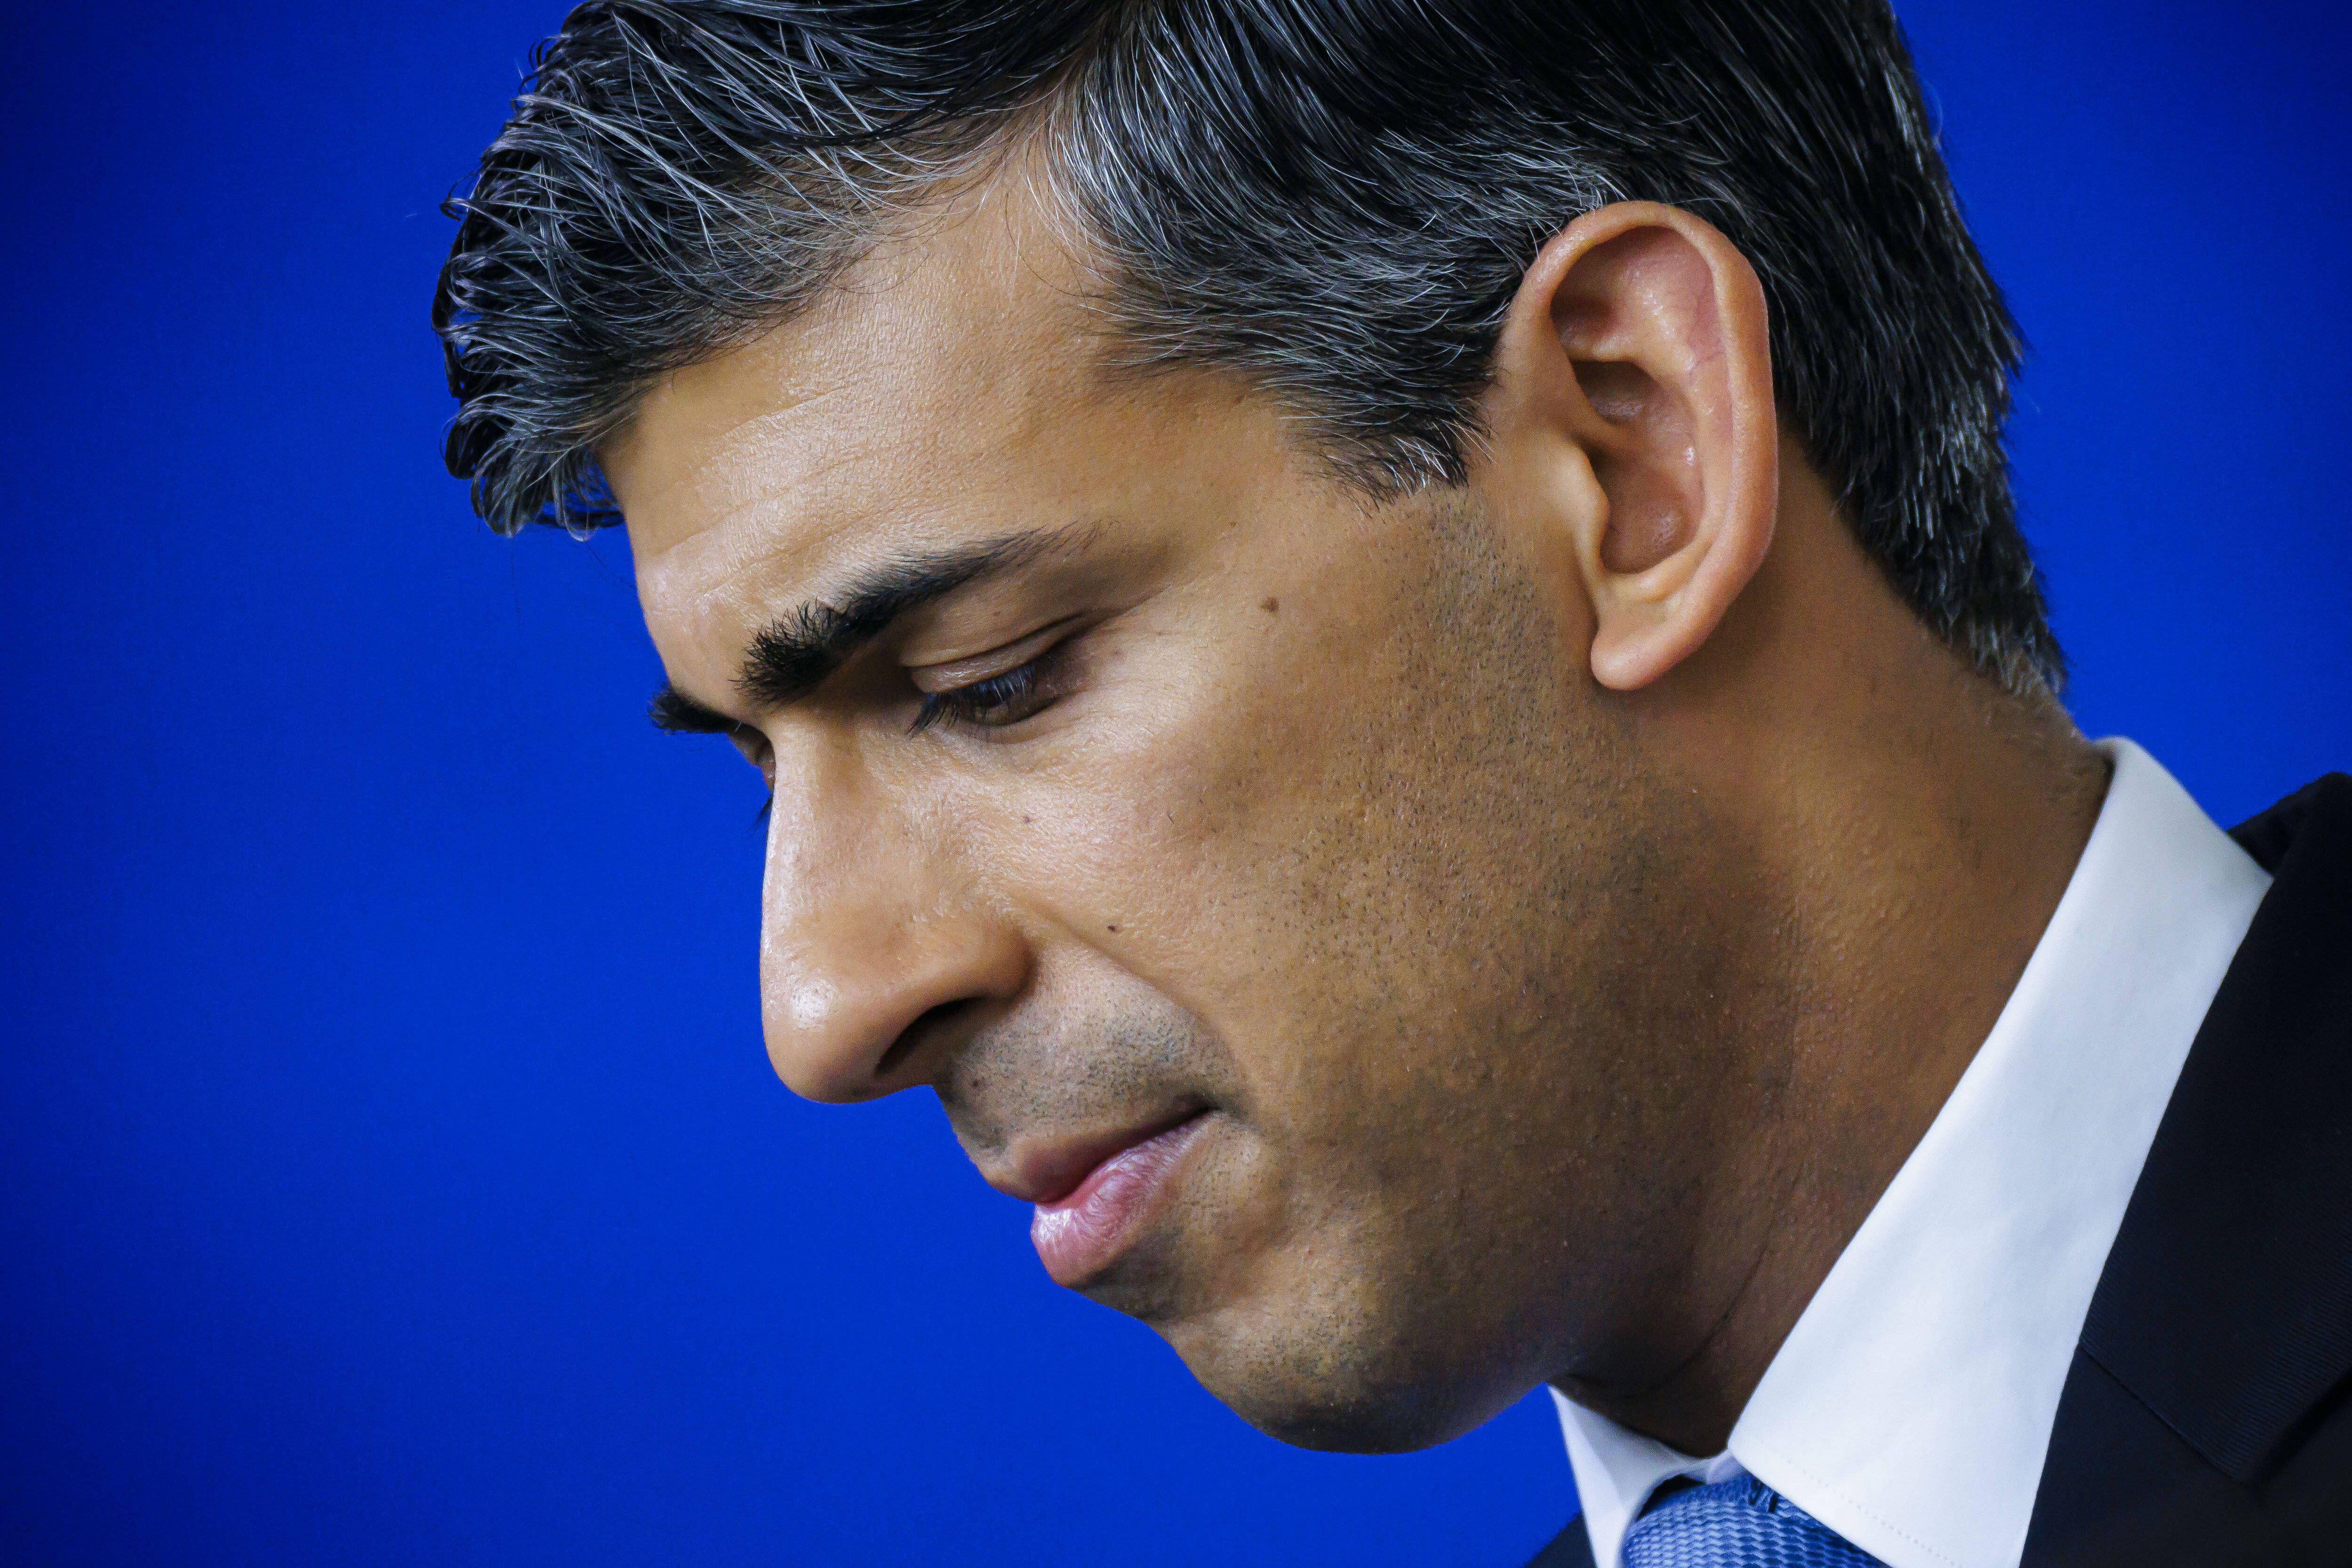 Rishi Sunak, Prime Minister and leader of the Conservative Party, in profile looking sad.